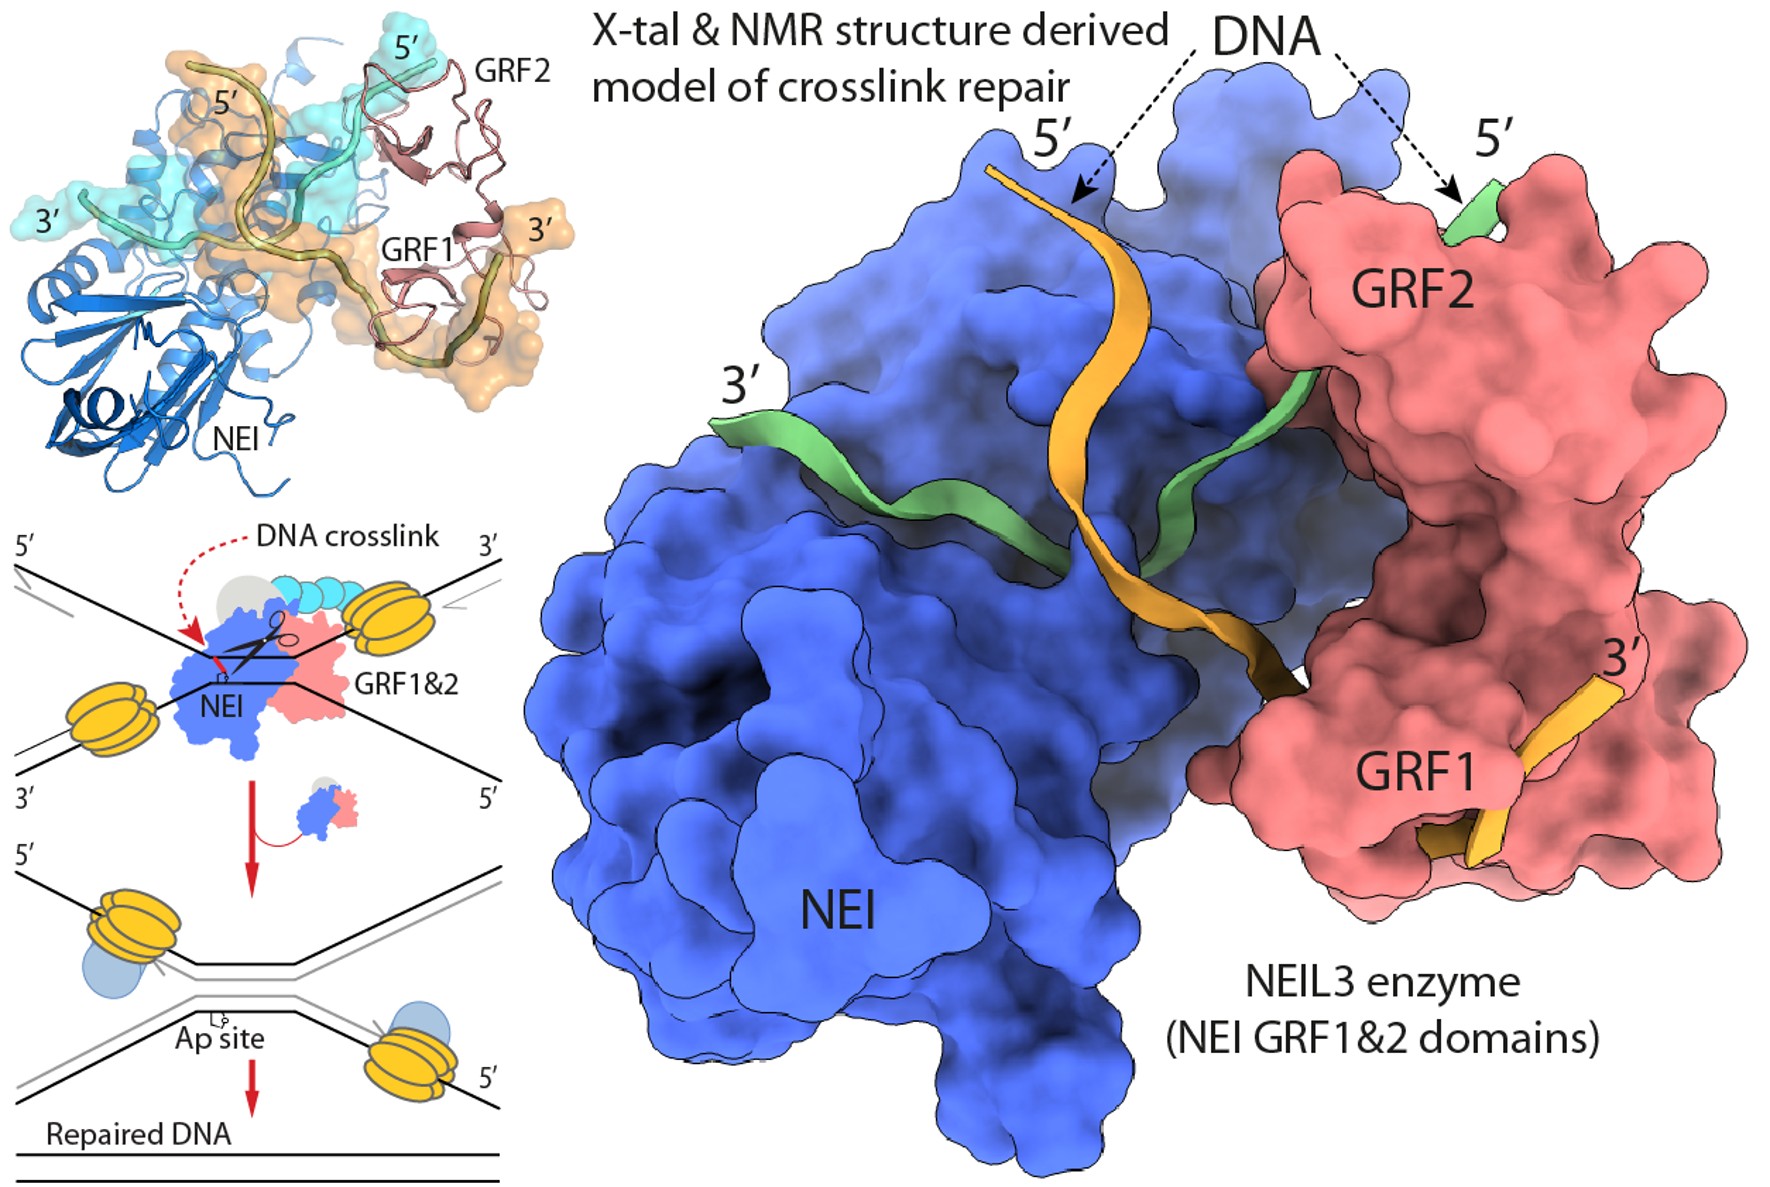 Structural elucidation of a DNA cross-link repair mechanism involving NEIL3 protein